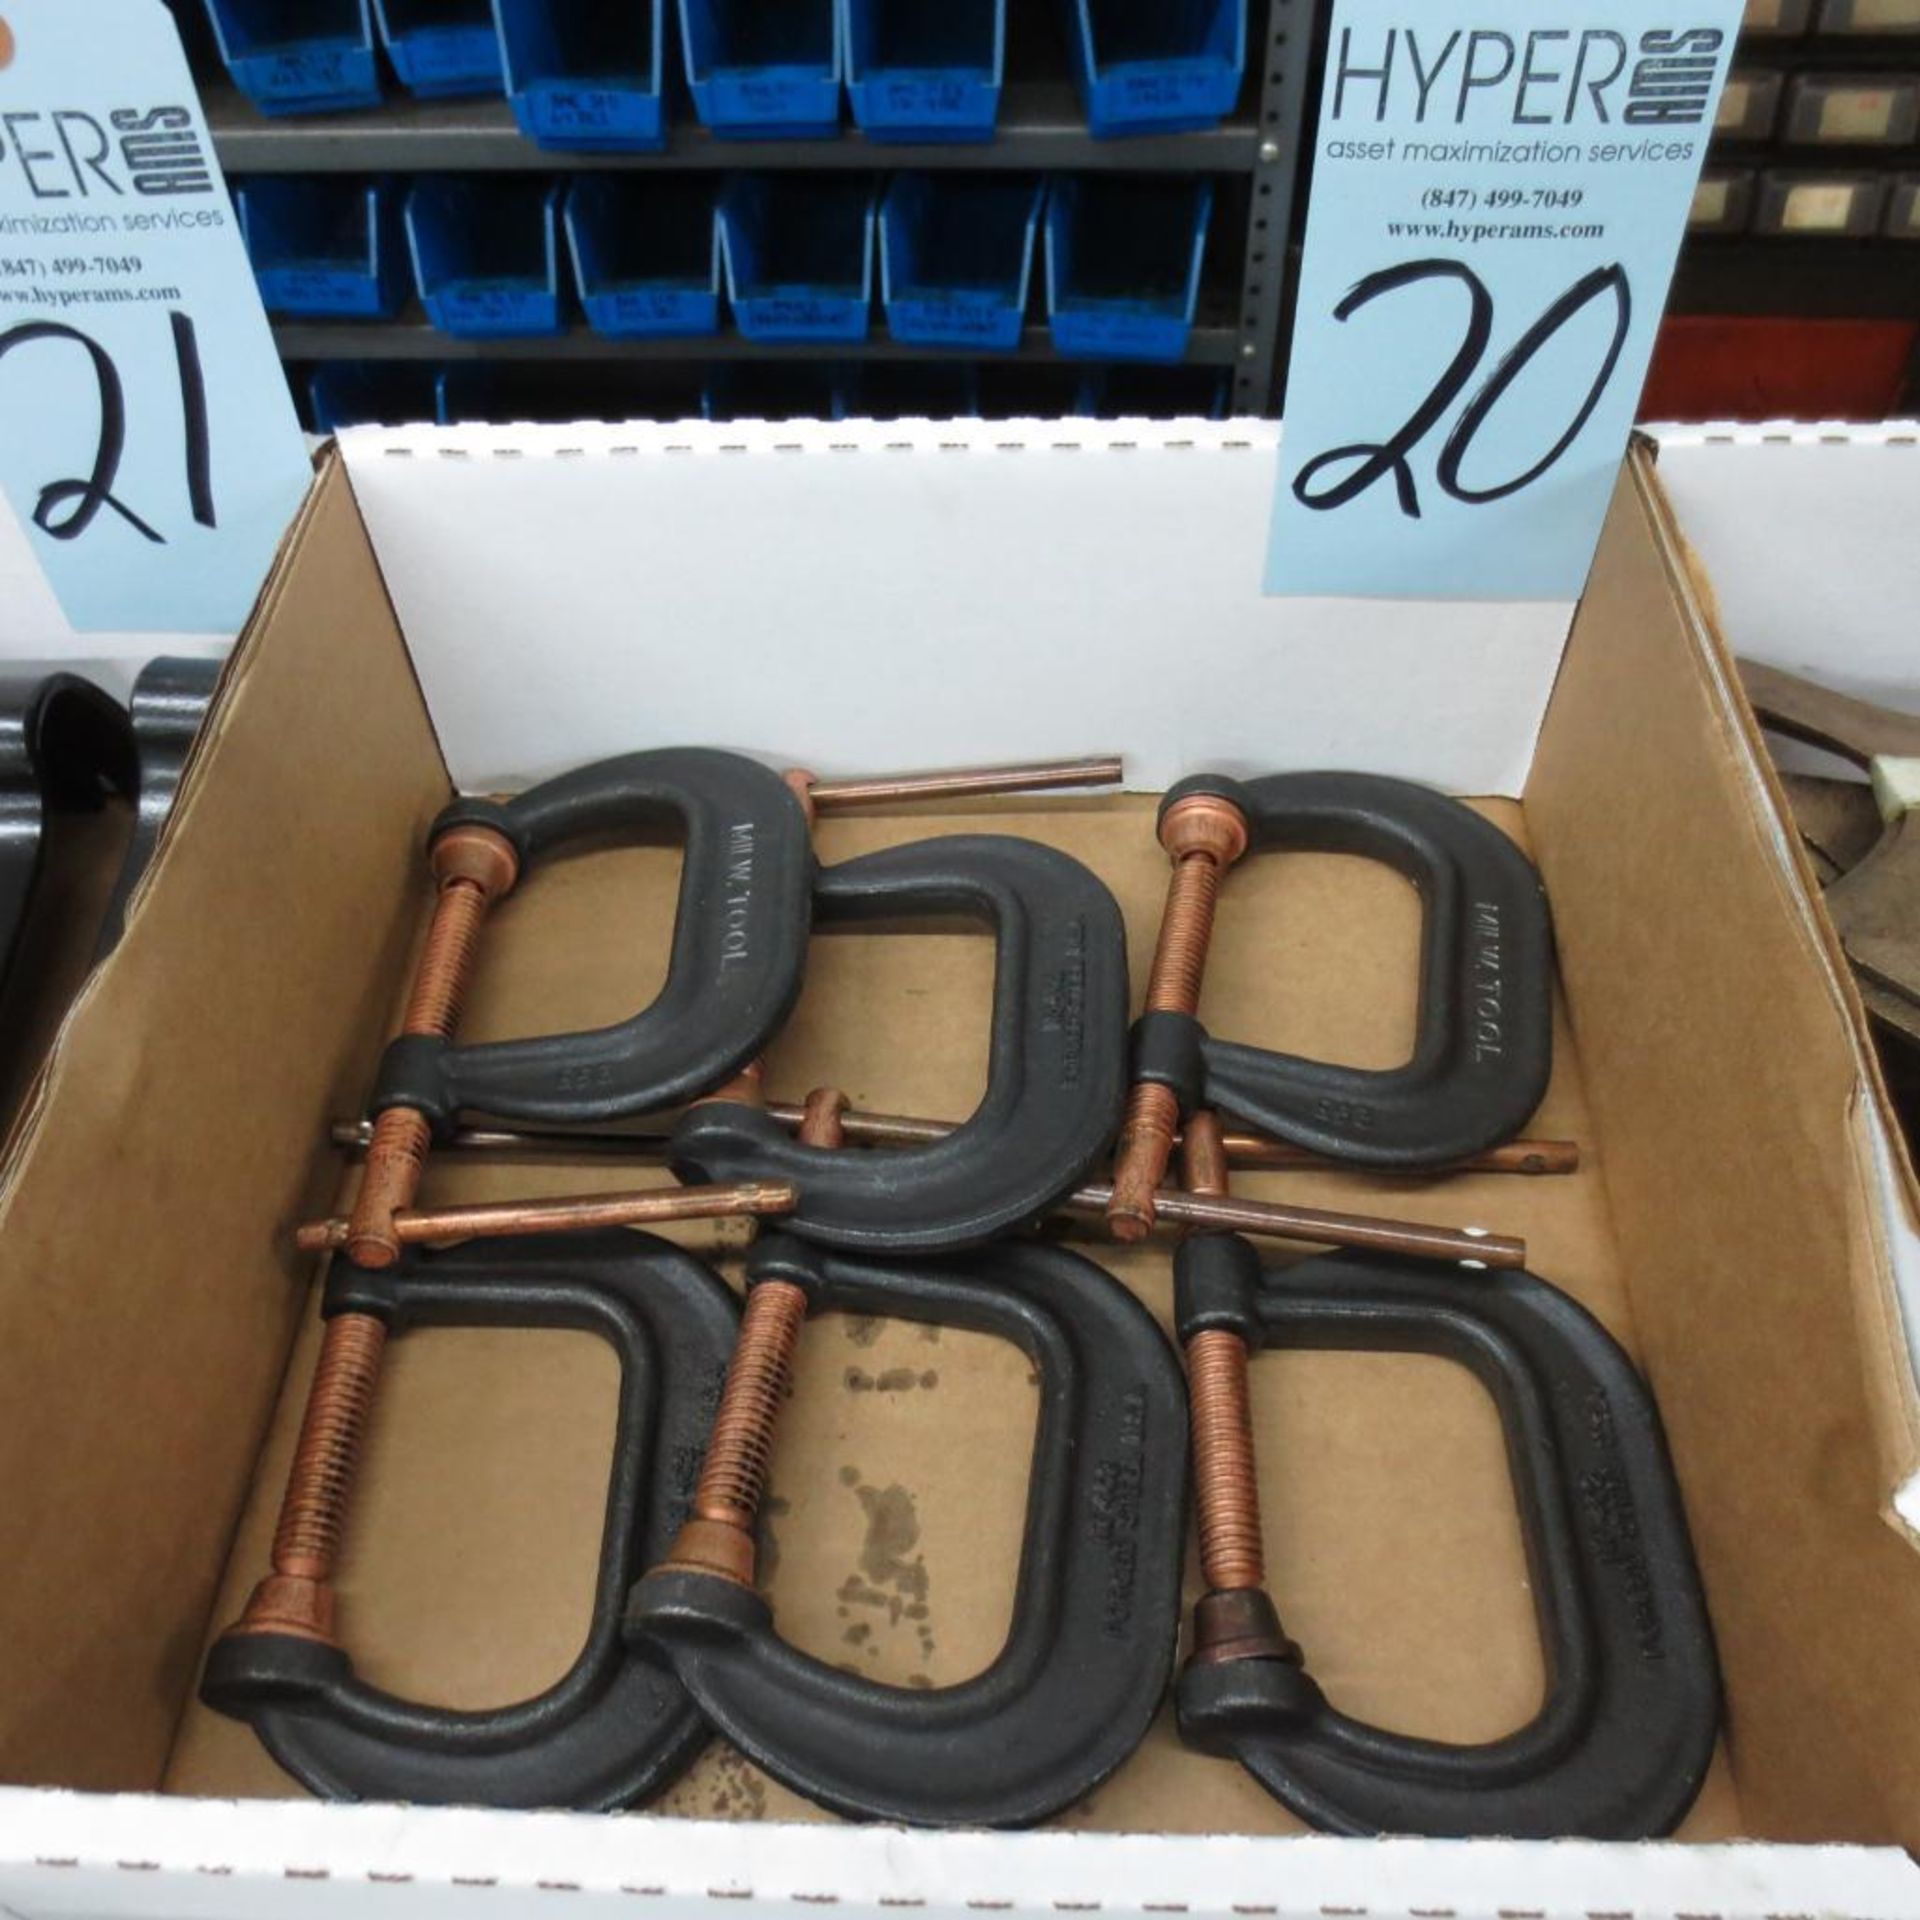 (6) NO.402 C-Clamps in one box